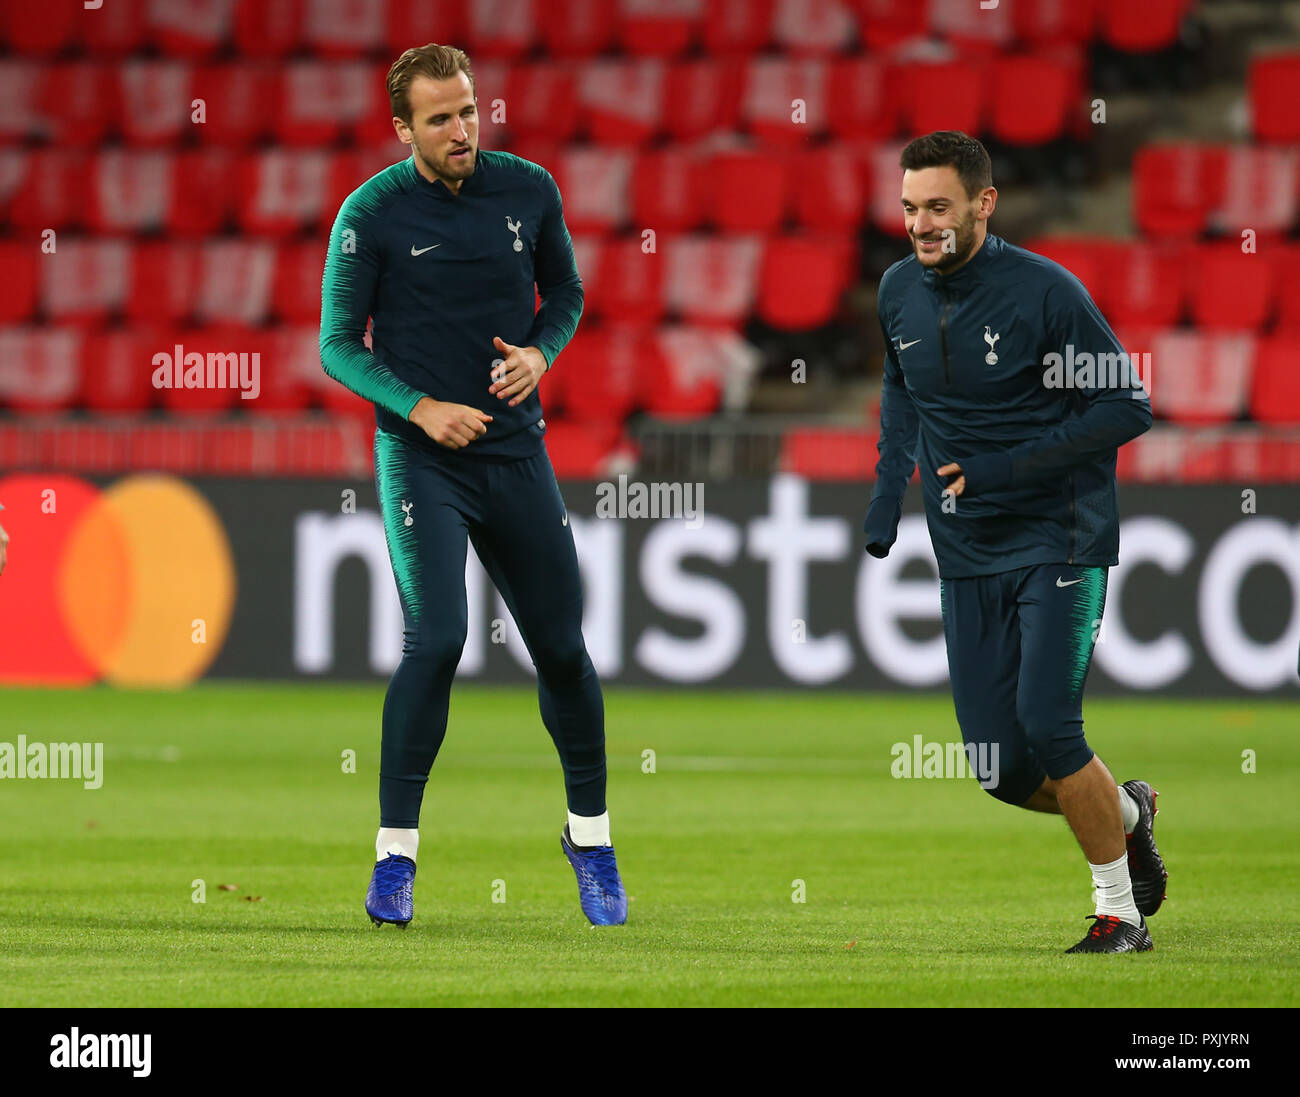 Eindhoven, Netherlands. October 23. 2018 Tottenham Hotspur's Harry Kane during Tottenham Hotspur training session ahead of the UEFA Champions League Group B match against PSV Eindhoven at Phillips stadium, in Eindhoven, Netherlands, on 23 Oct , 2018  Credit Action Foto Sport Credit: Action Foto Sport/Alamy Live News Stock Photo